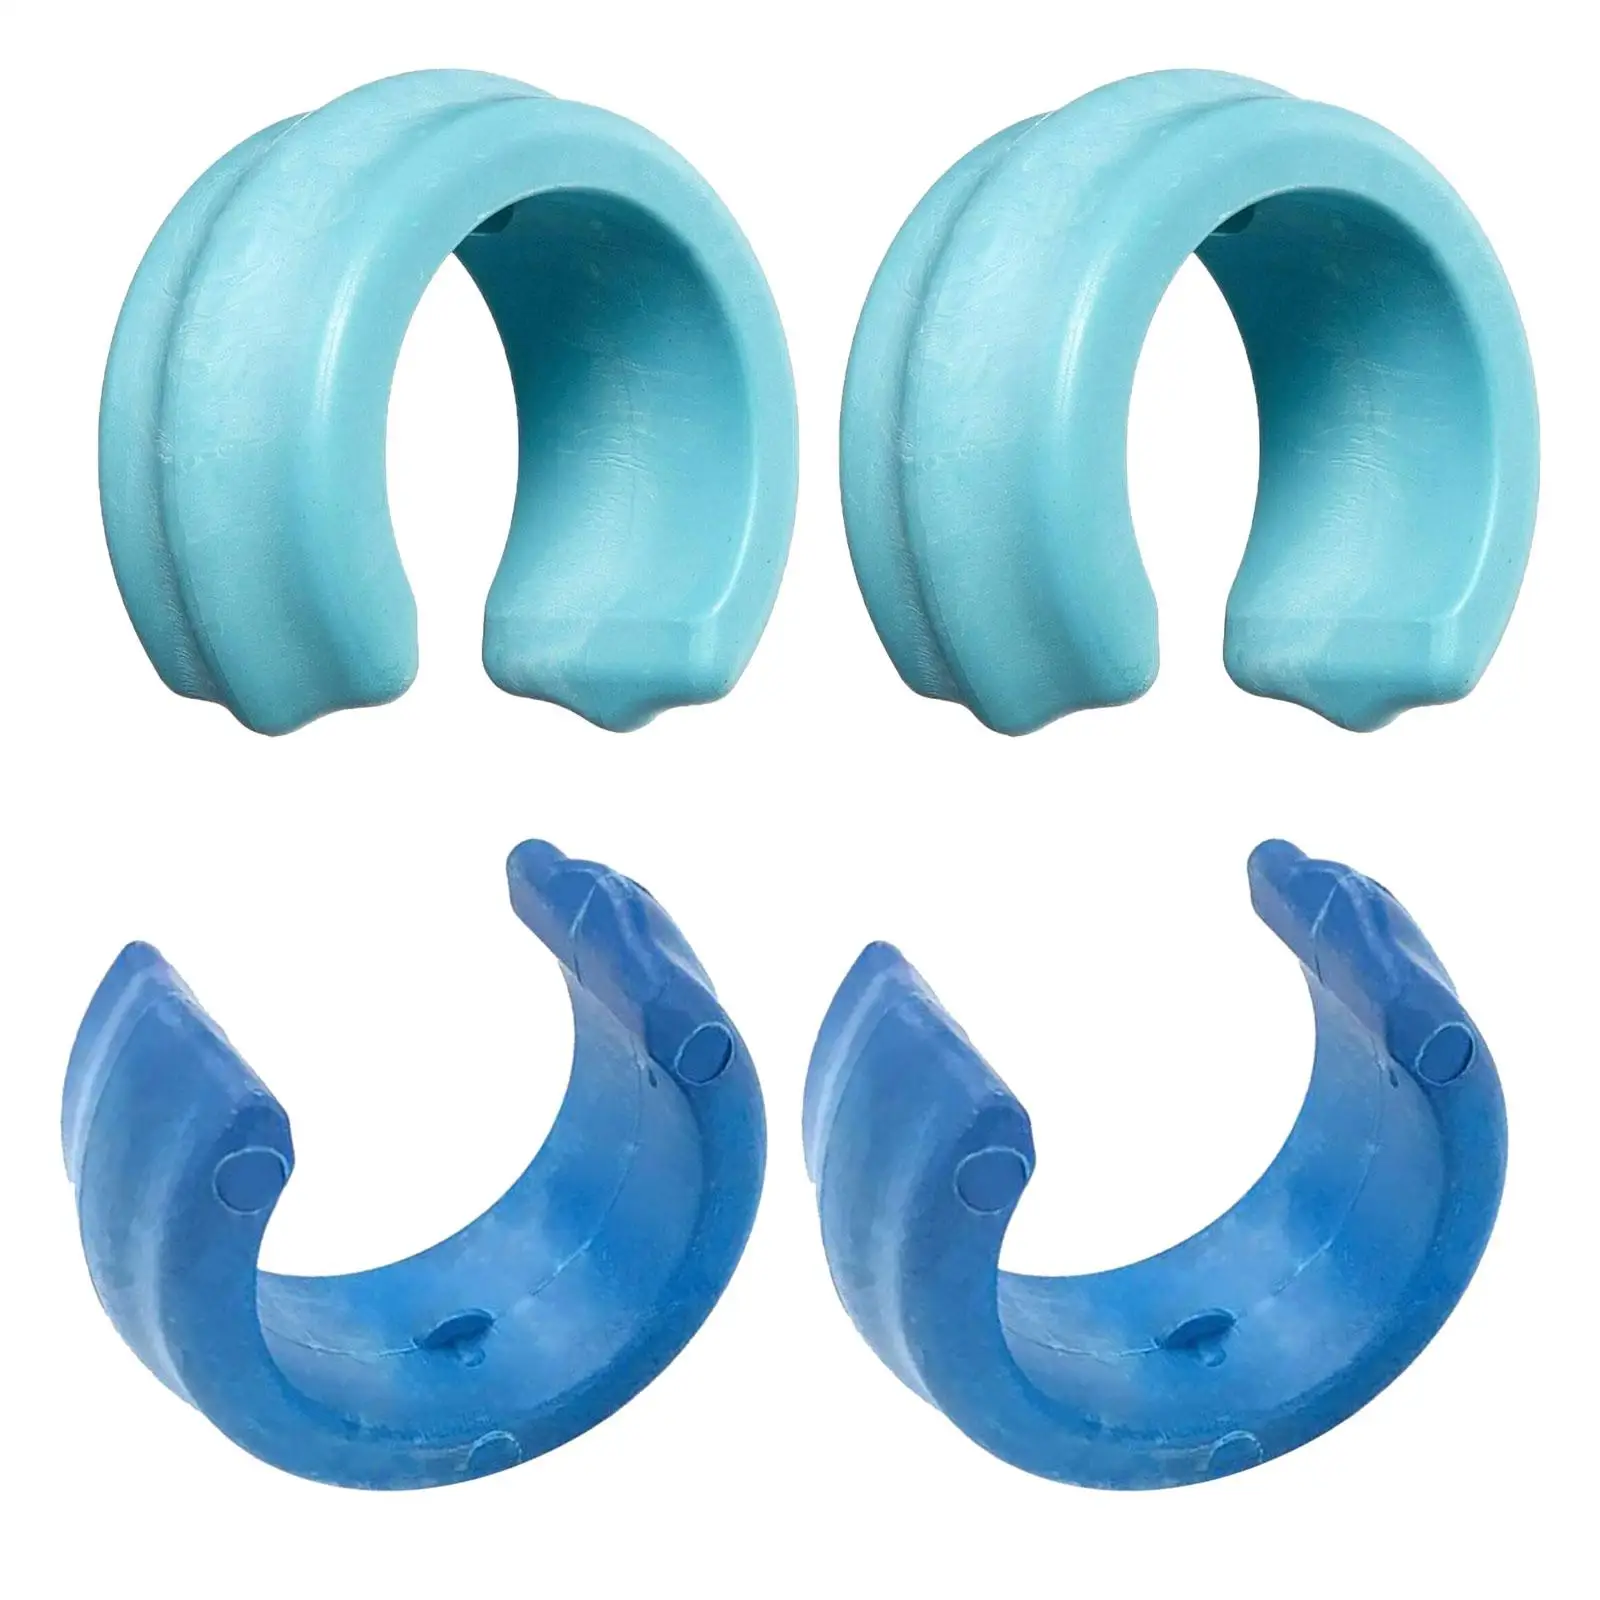 2x Universal Pool Hose Weight Practical Durable Material Swimming Pool Accessories for x70105 Pool Cleaning Tools Accessories